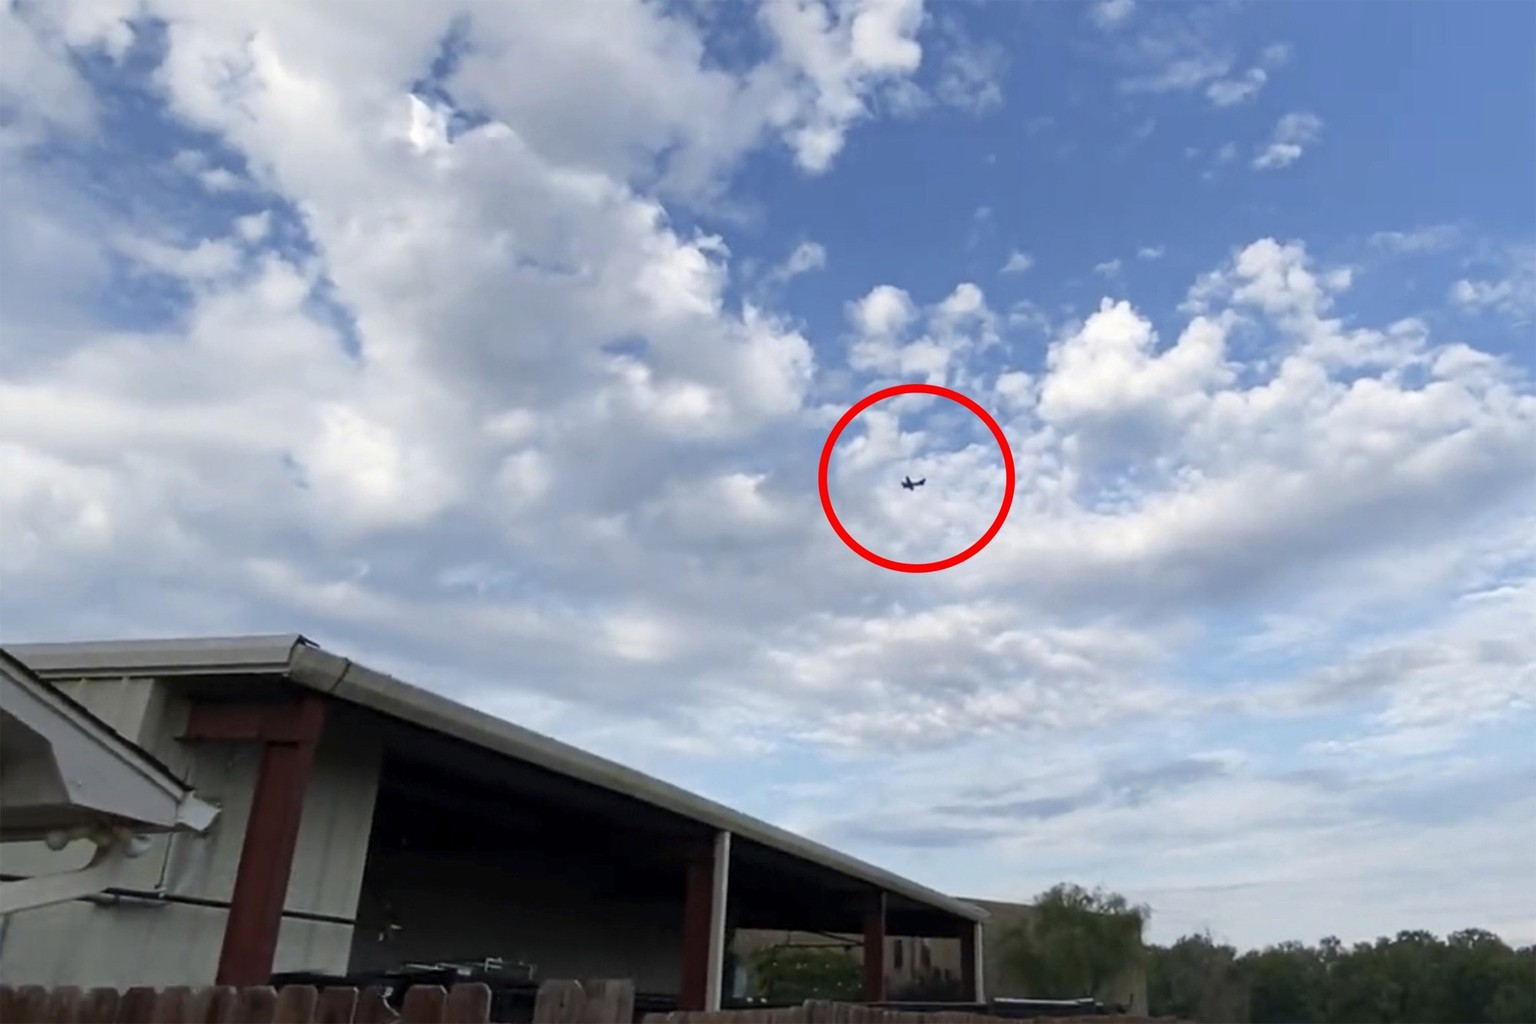 A small airplane circles over Tupelo, Miss., on Saturday, Sept. 3, 2022. Police say the pilot of the small airplane is threatening to crash the aircraft into a Walmart store. The Tupelo Police Departm ...